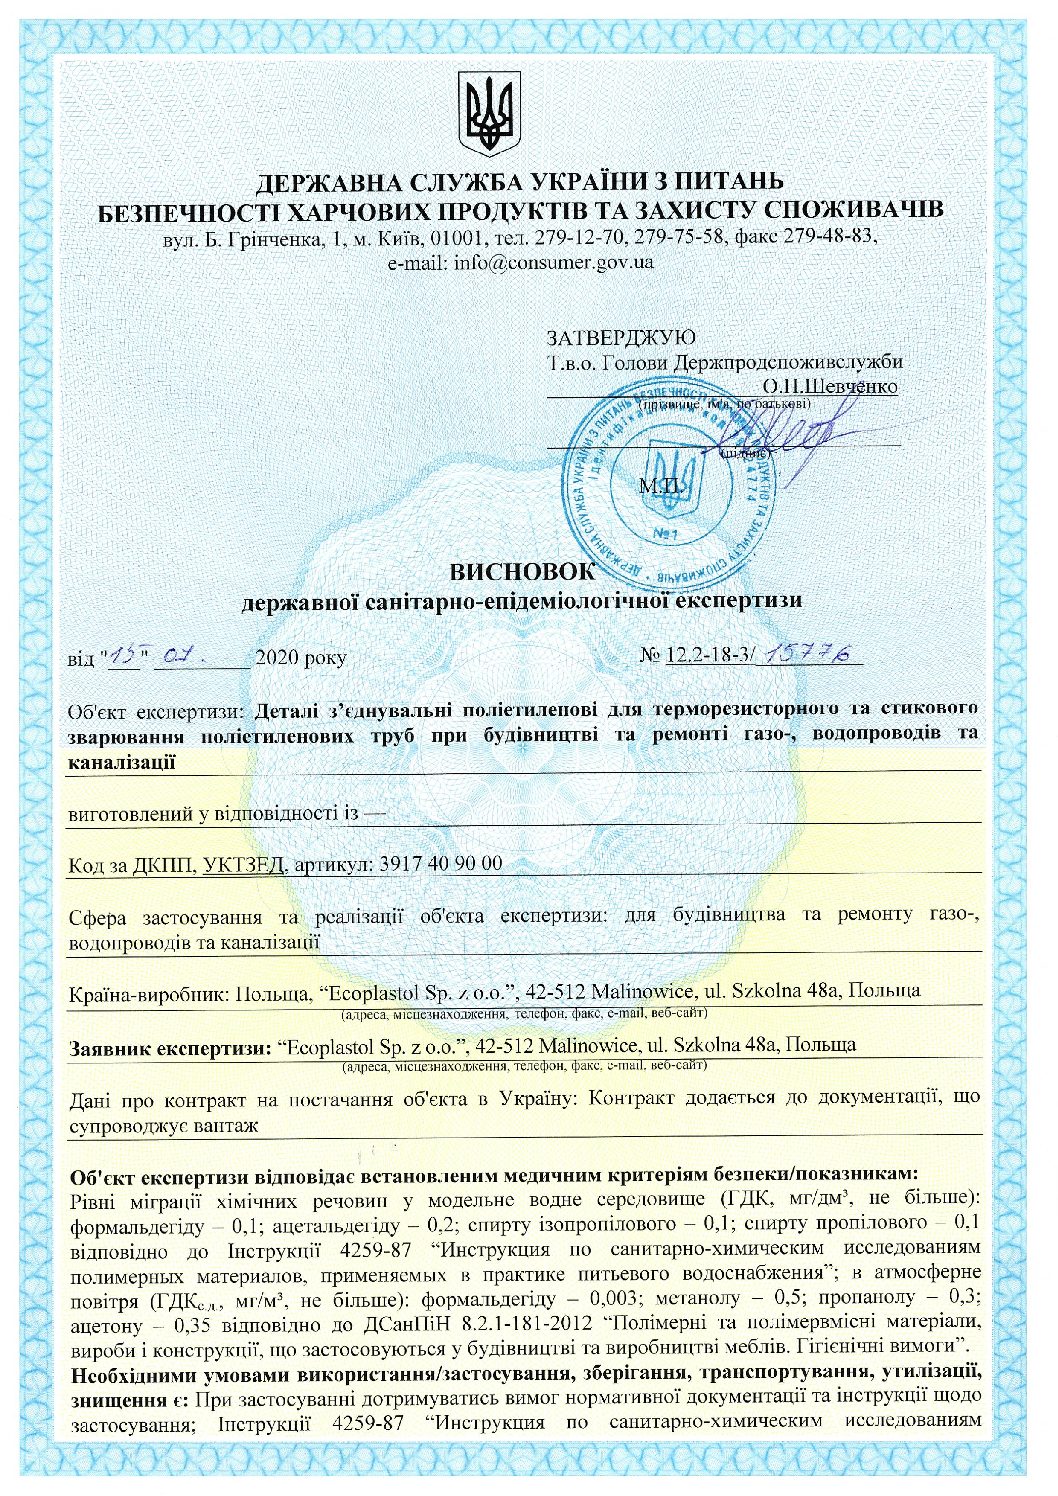 Sanitary and epidemiological Certificate of Ukraine